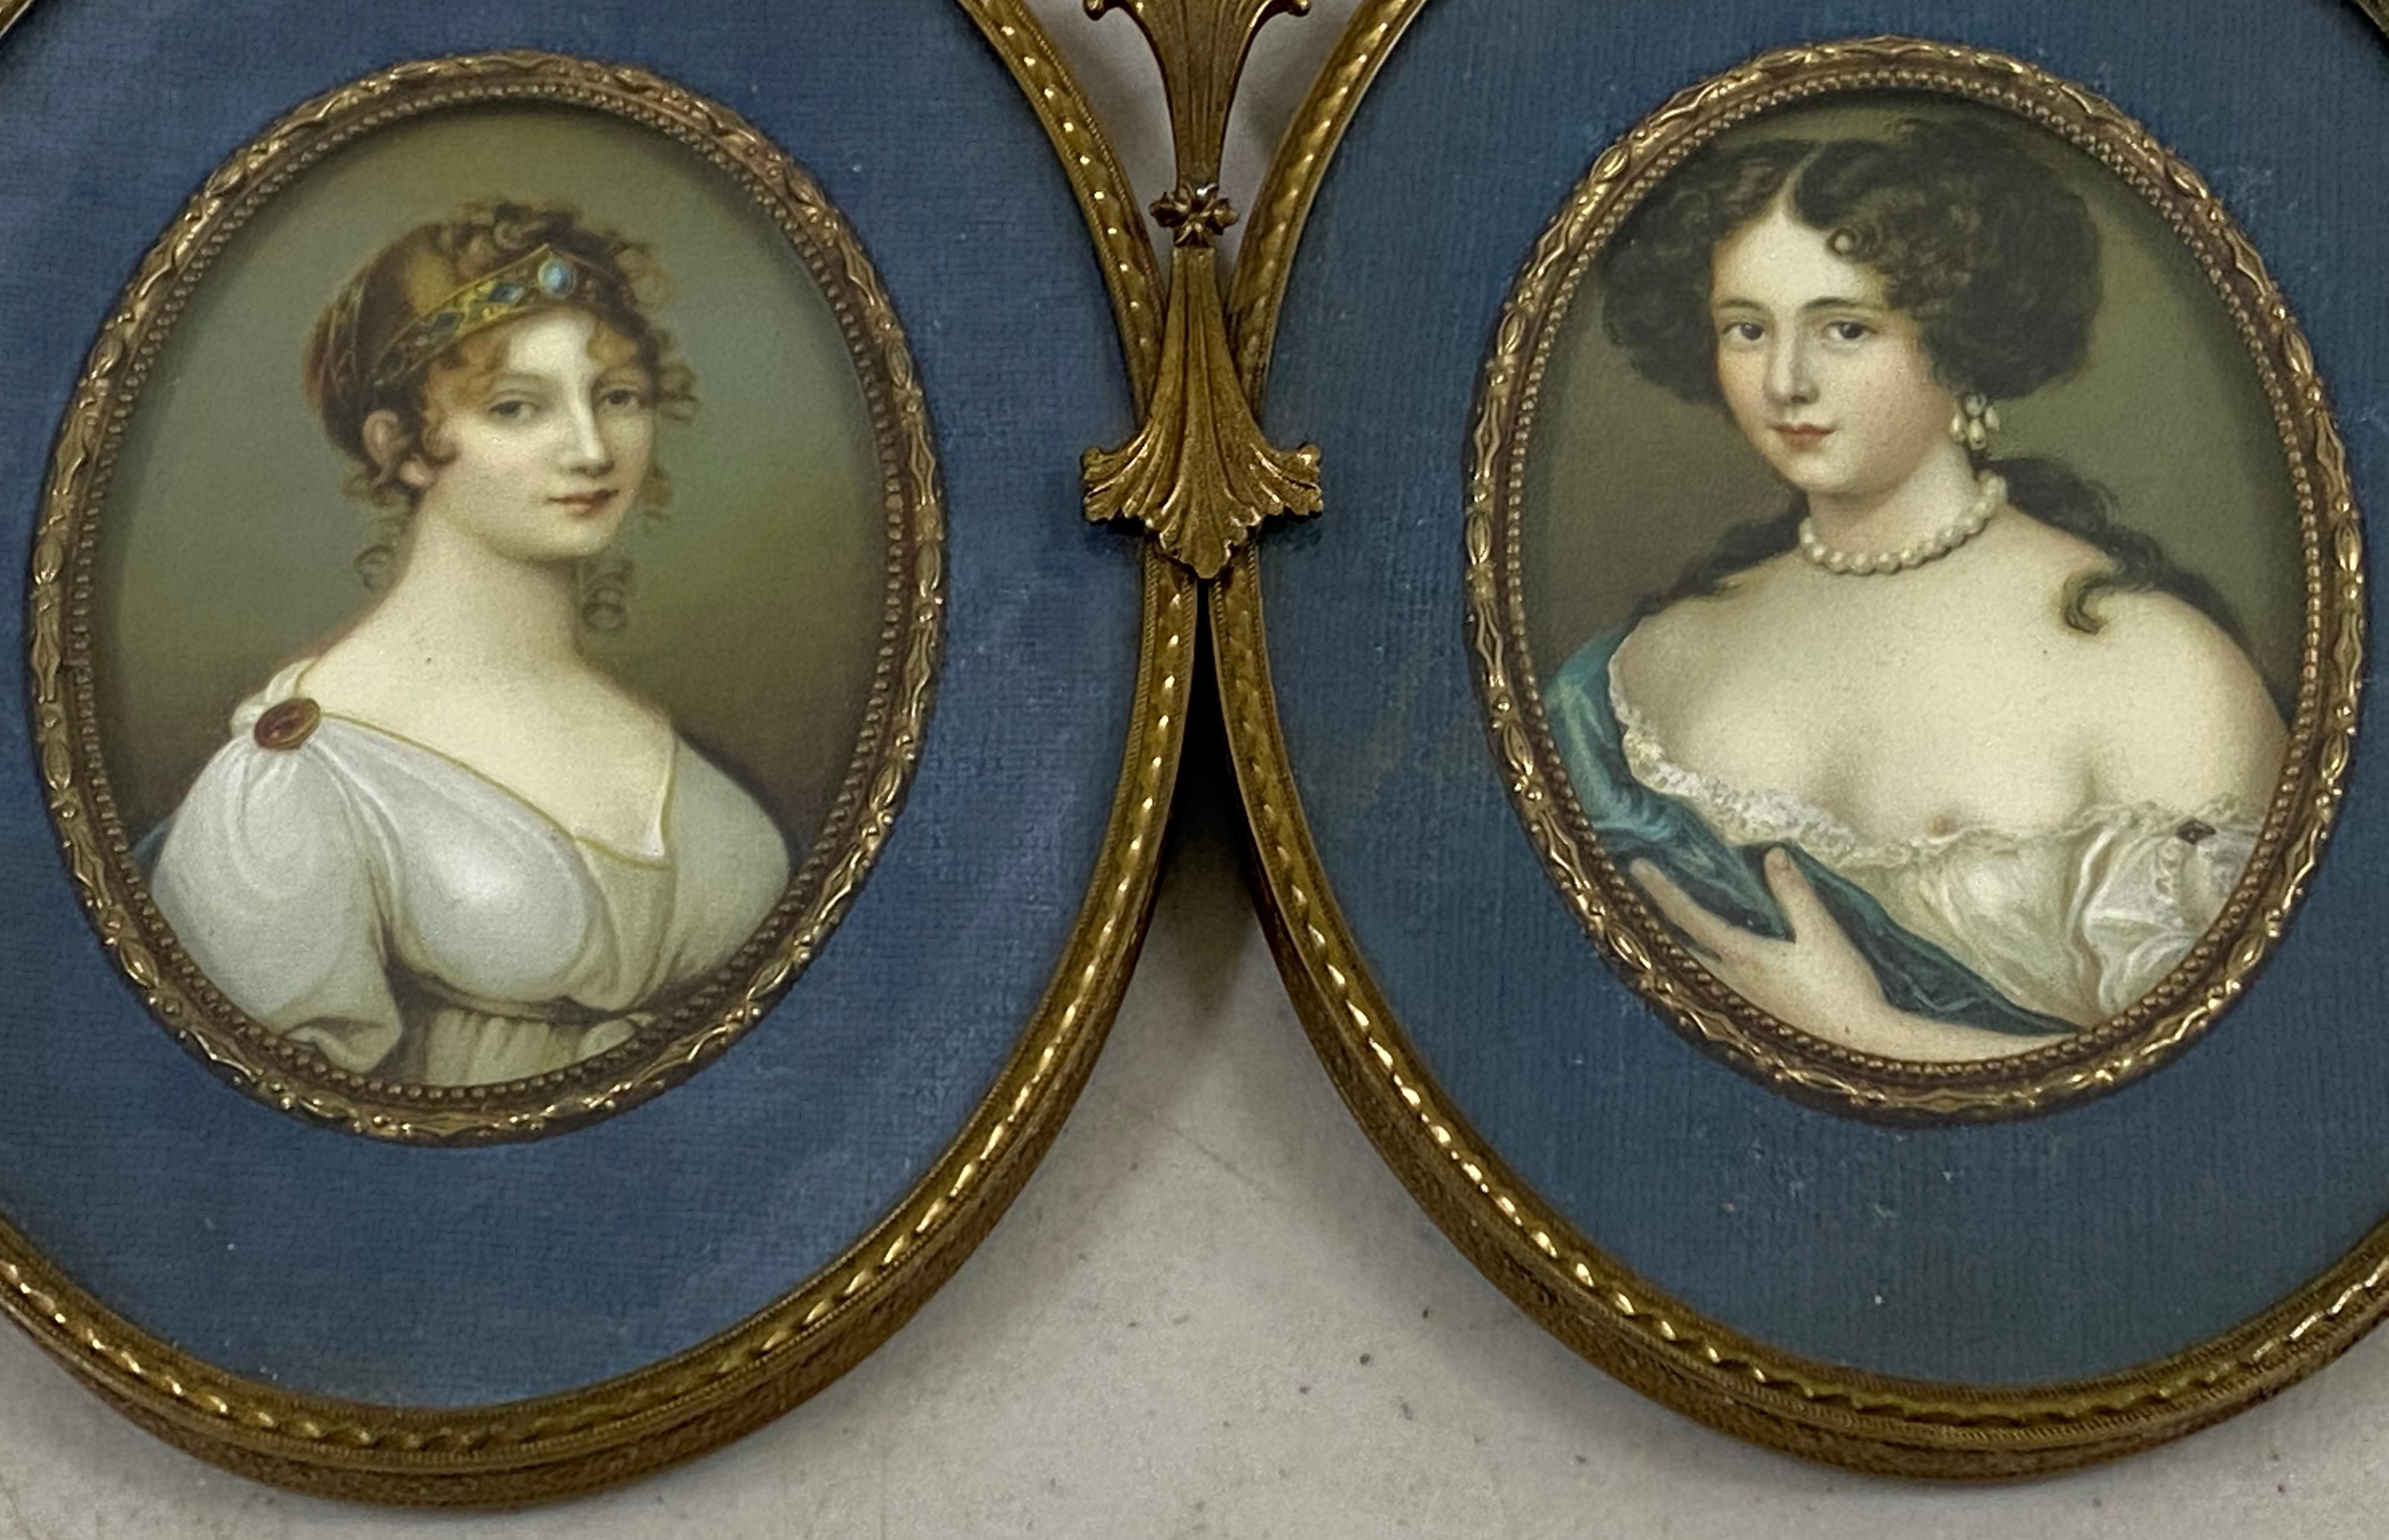 Vintage bronze double miniature portrait frame w/ prints

The prints shown are for display only - Display these charming women, or add your own pictures

A fine double portrait 